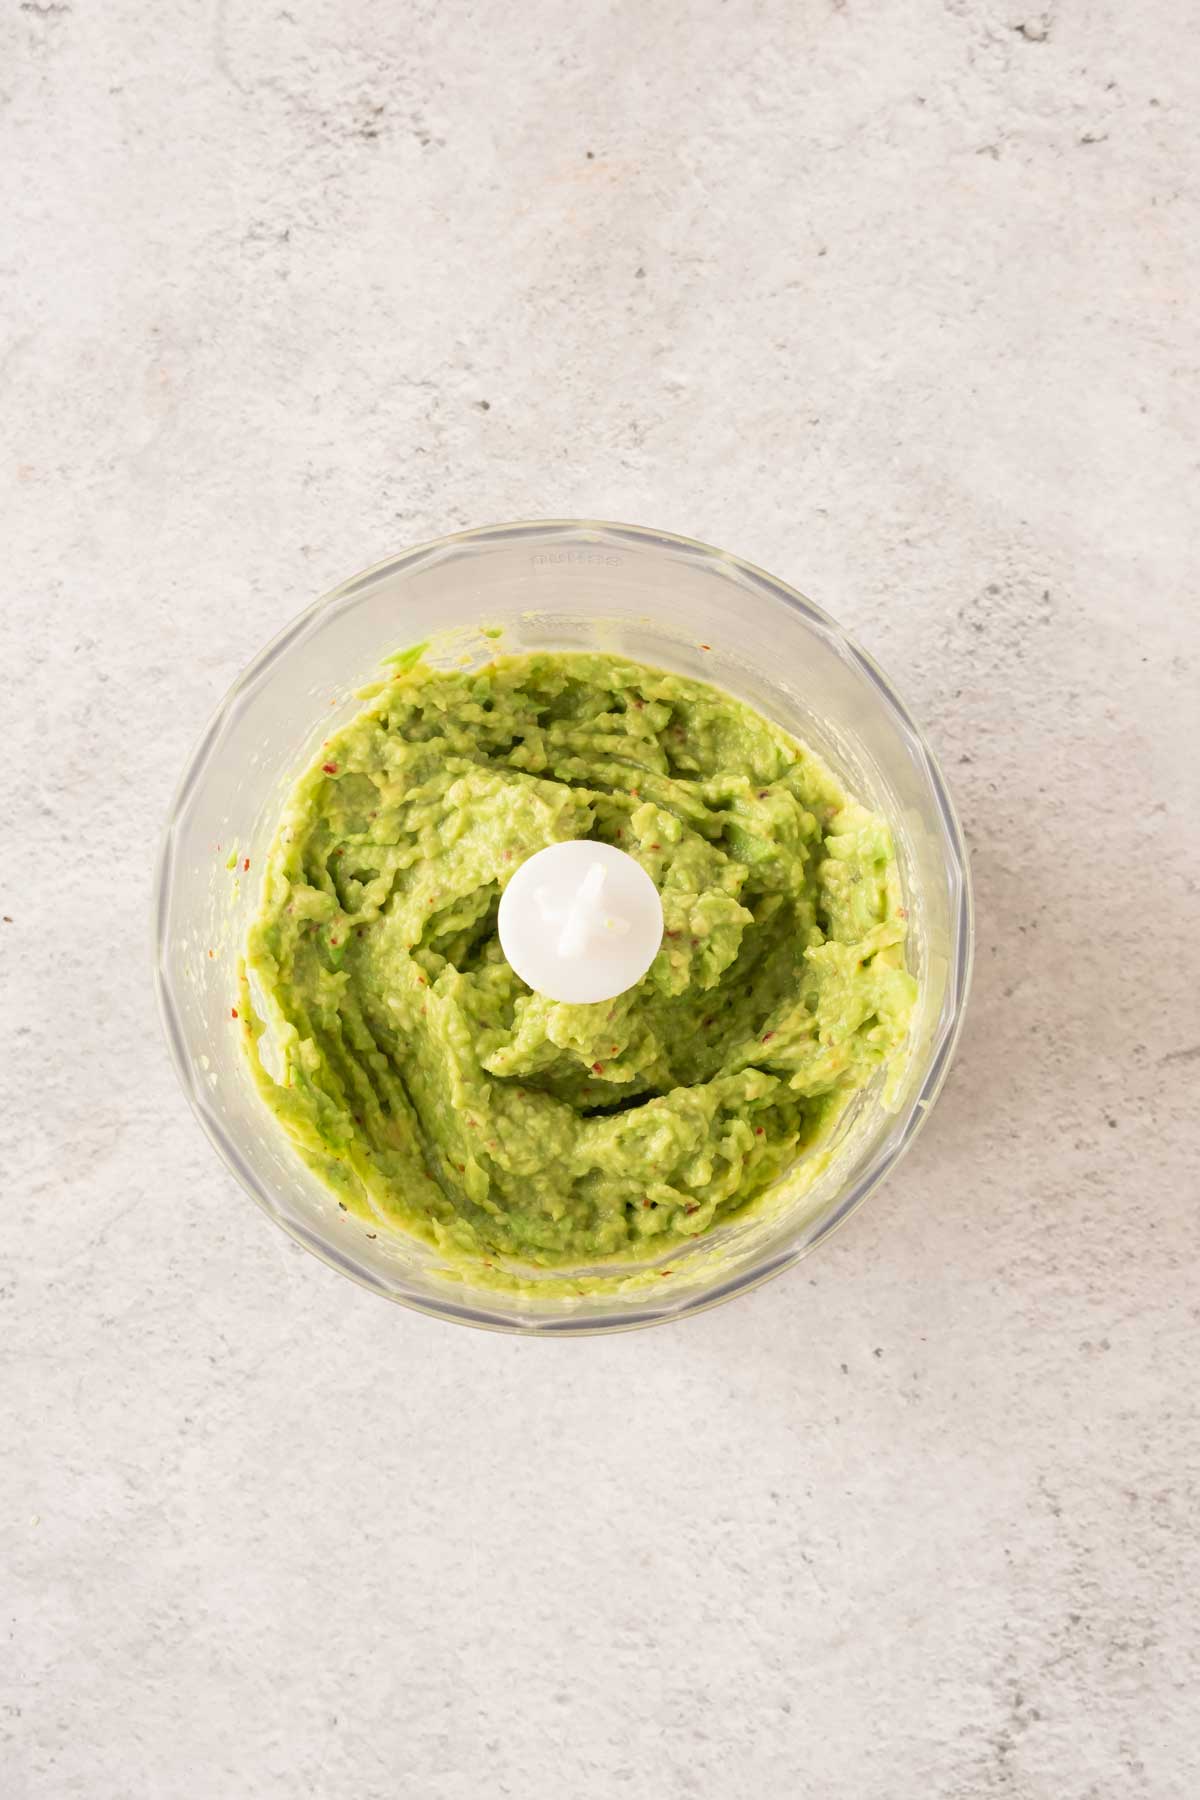 Mashed avocado in a food processor.